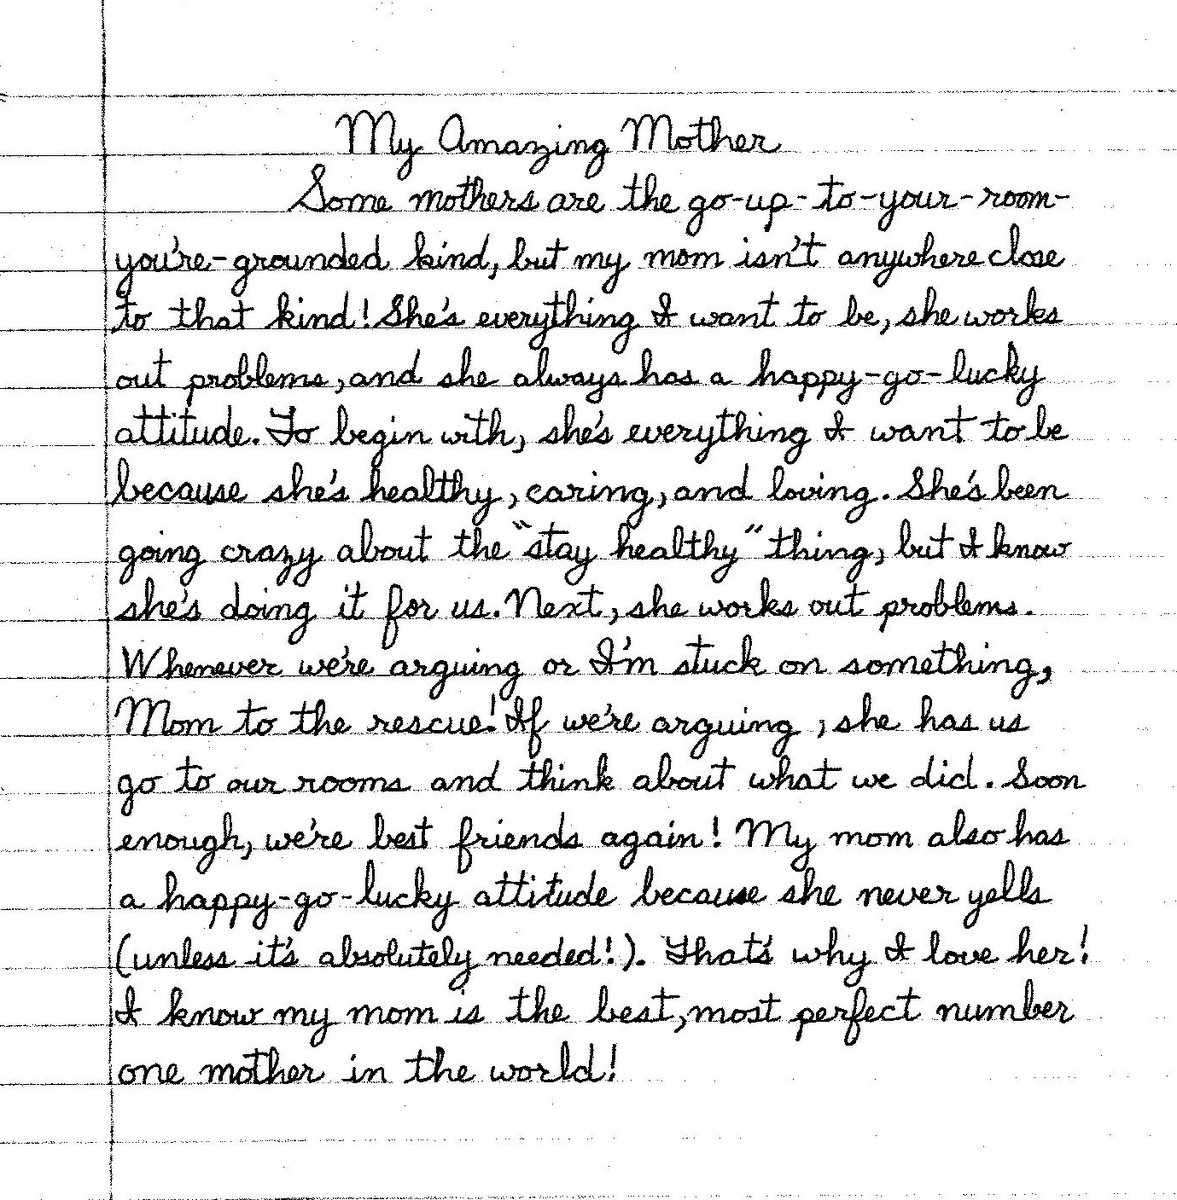 Student Essay #5: My Mother